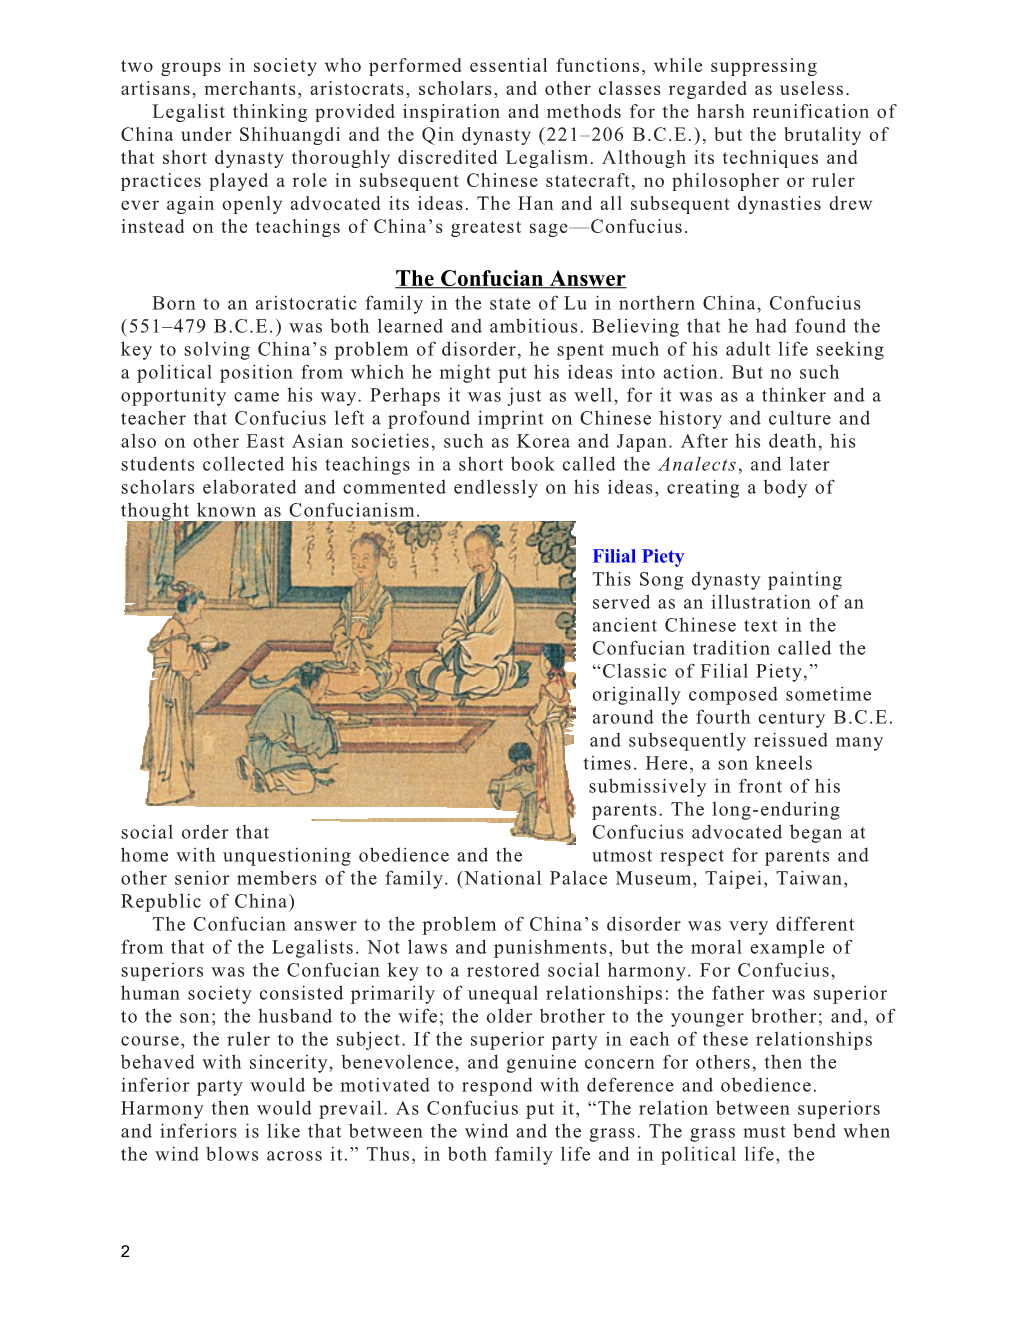 Whap Chapter 2: China and the Search for Order